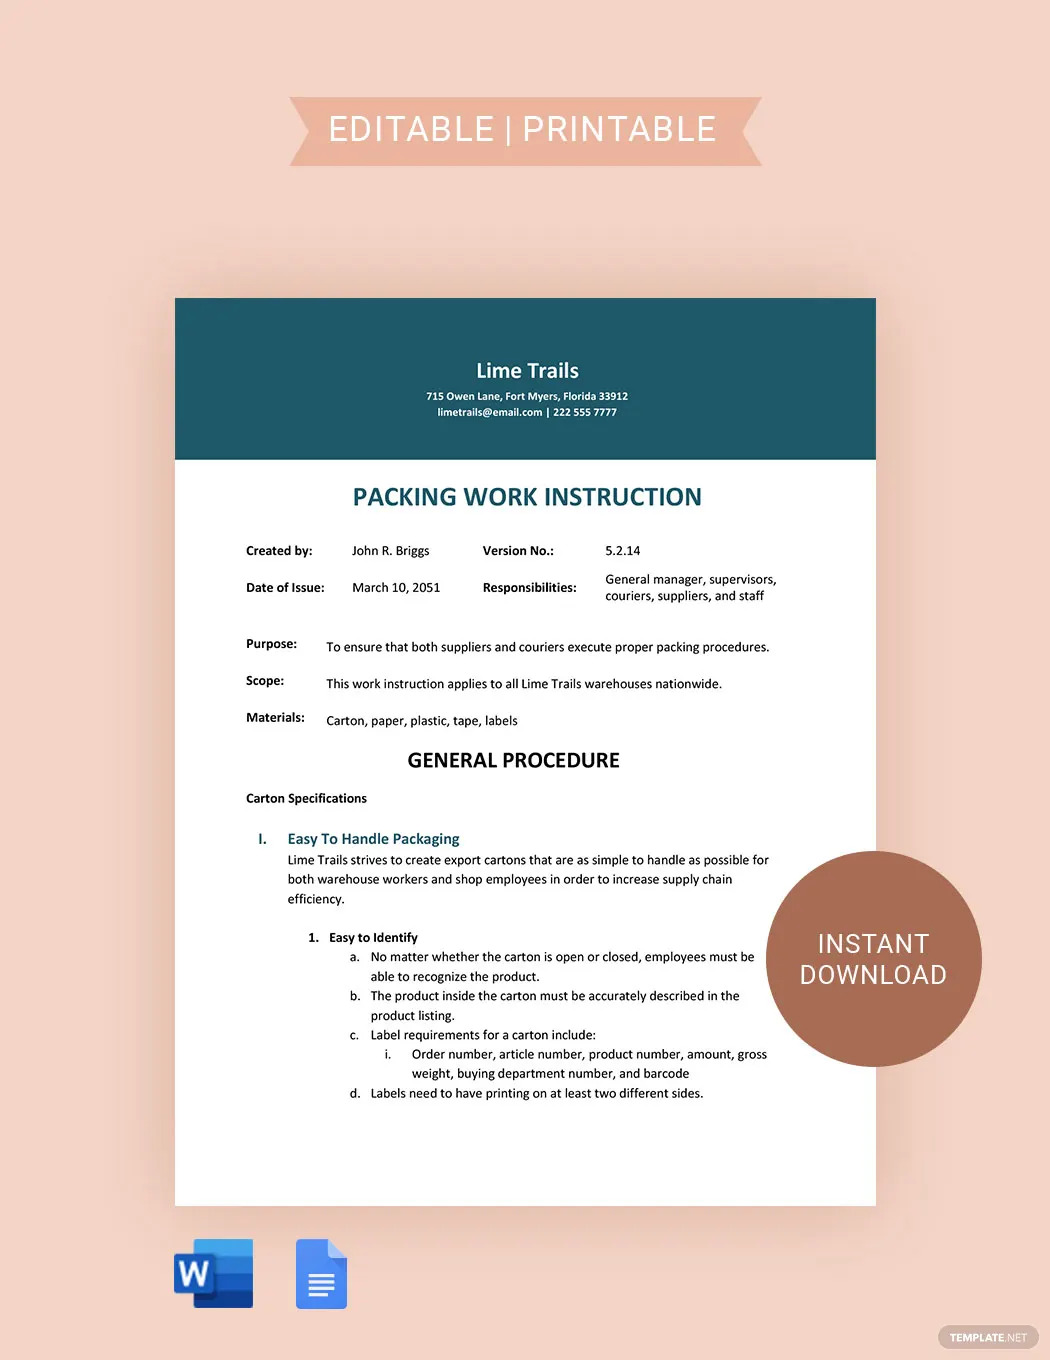 packing work instruction ideas and examples